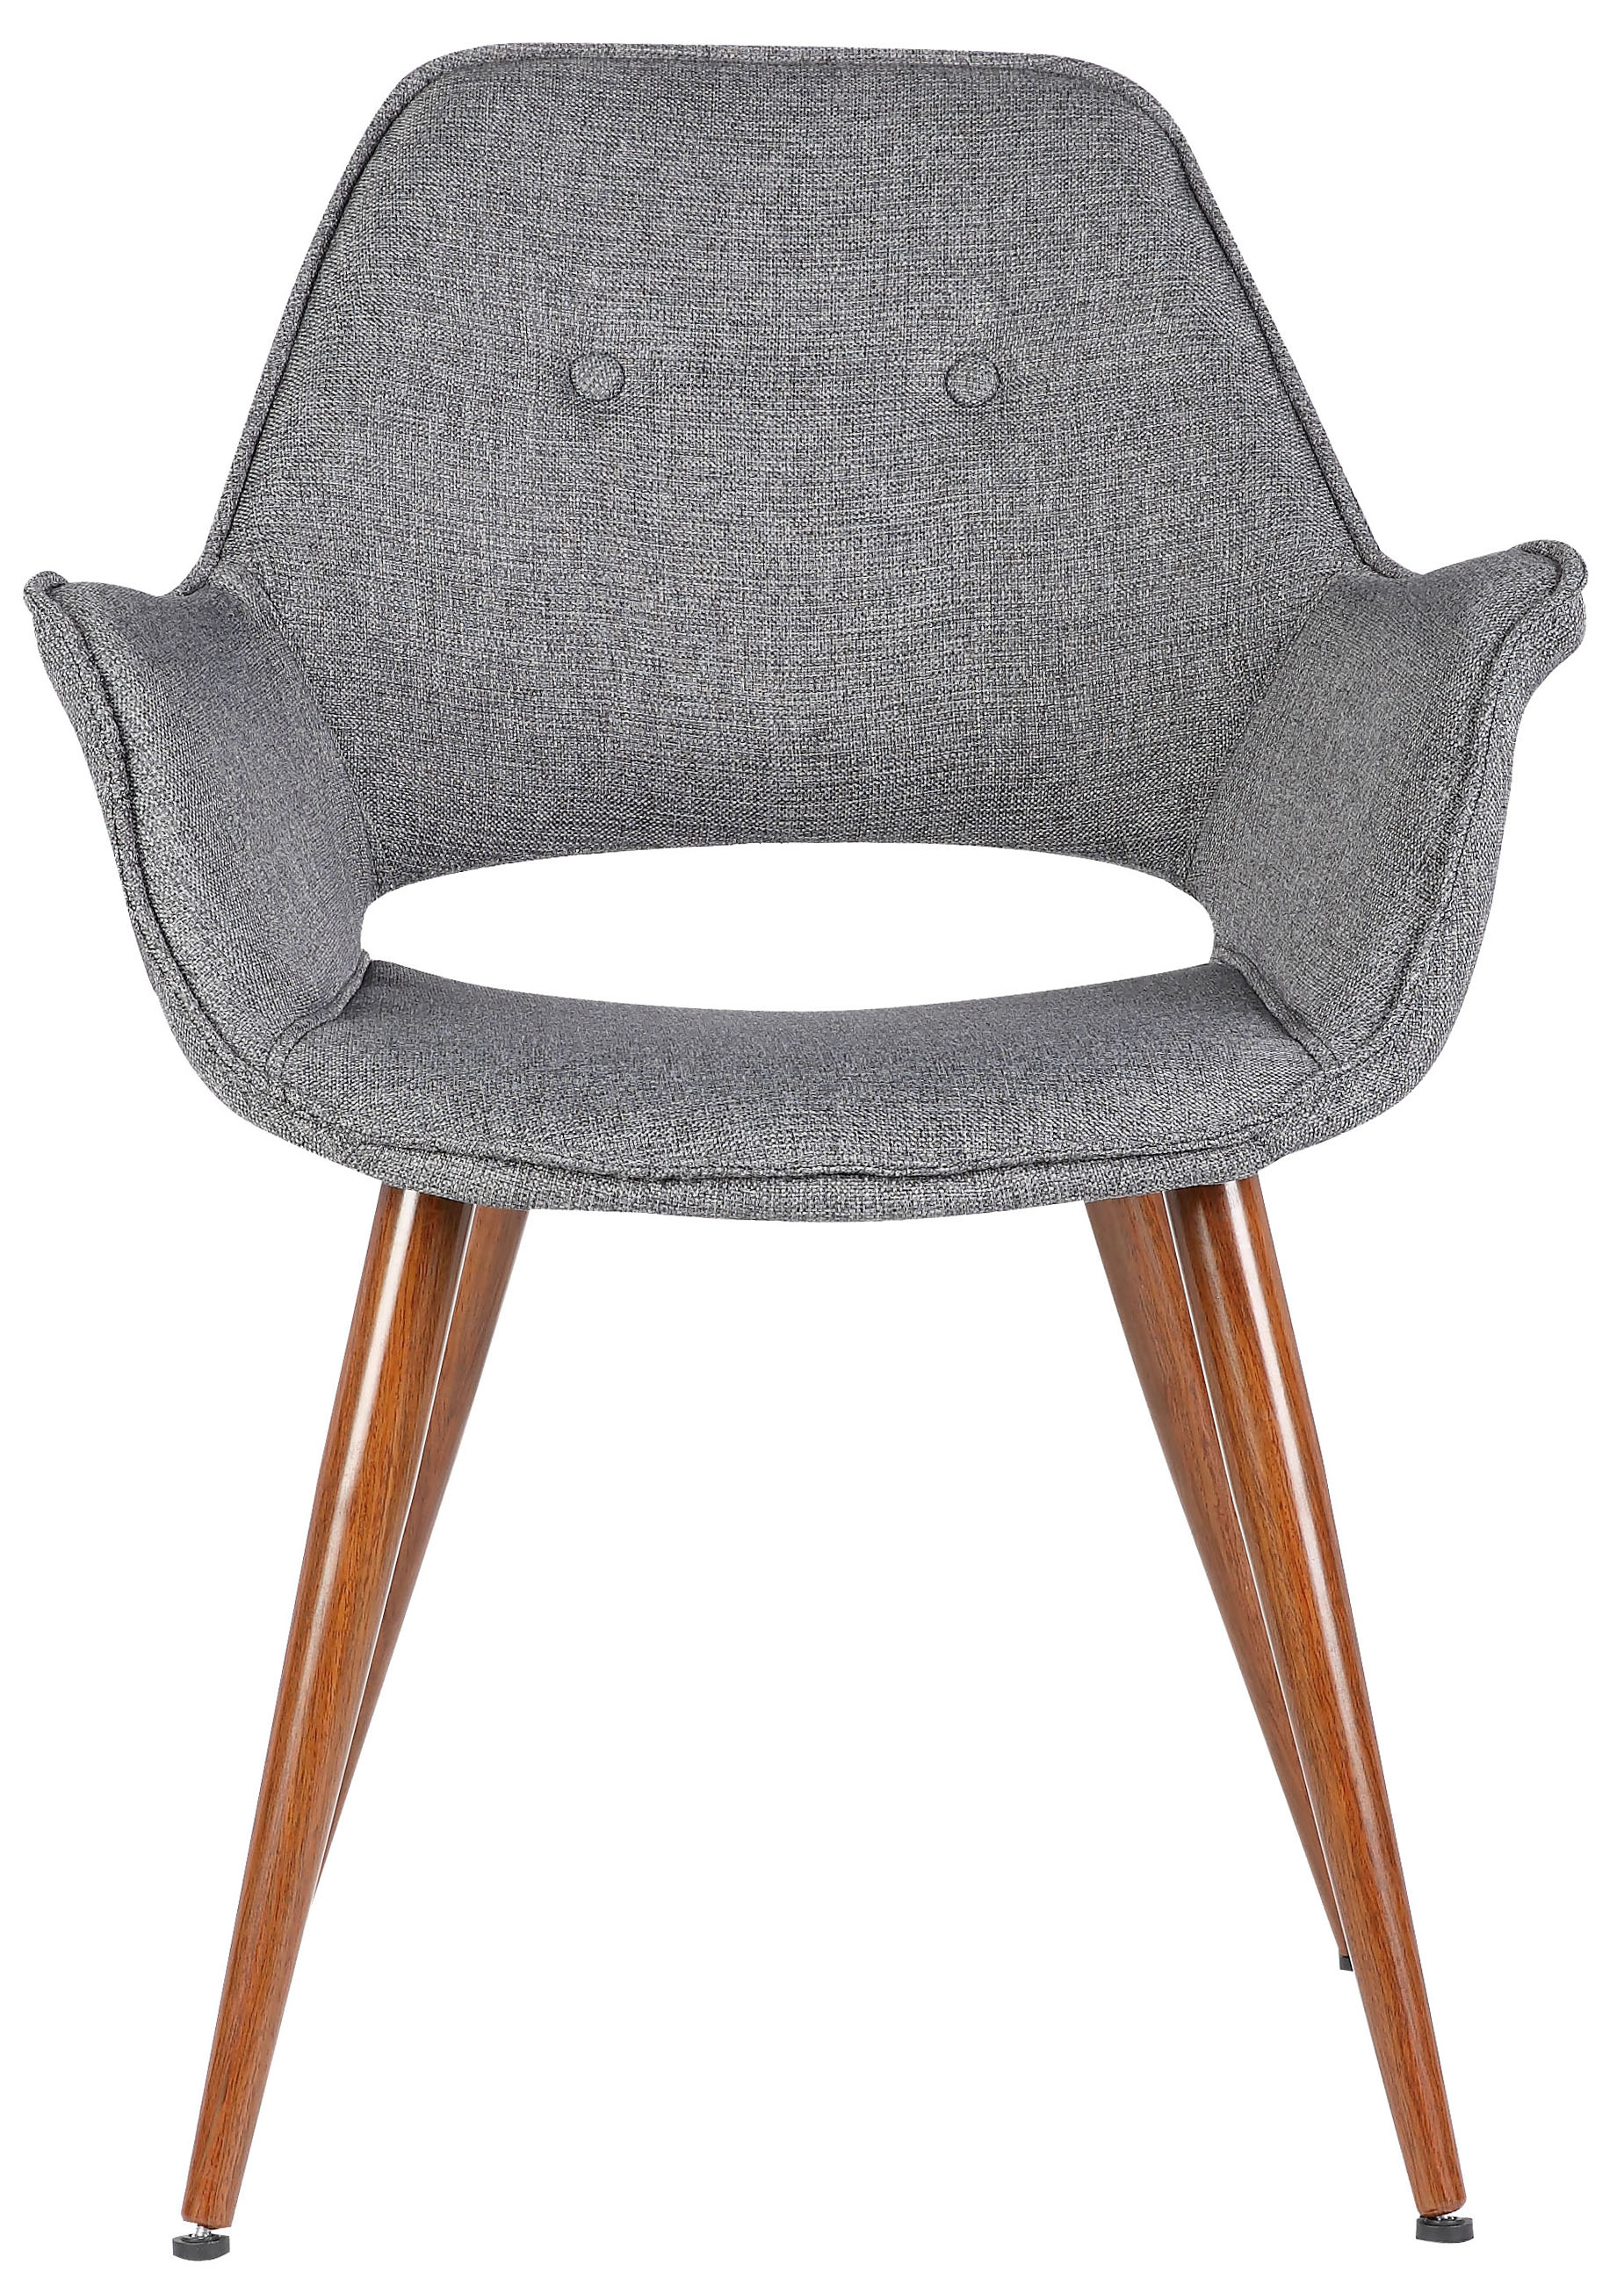 Charcoal Milo Chair for rent in California and East Coast | designer8*